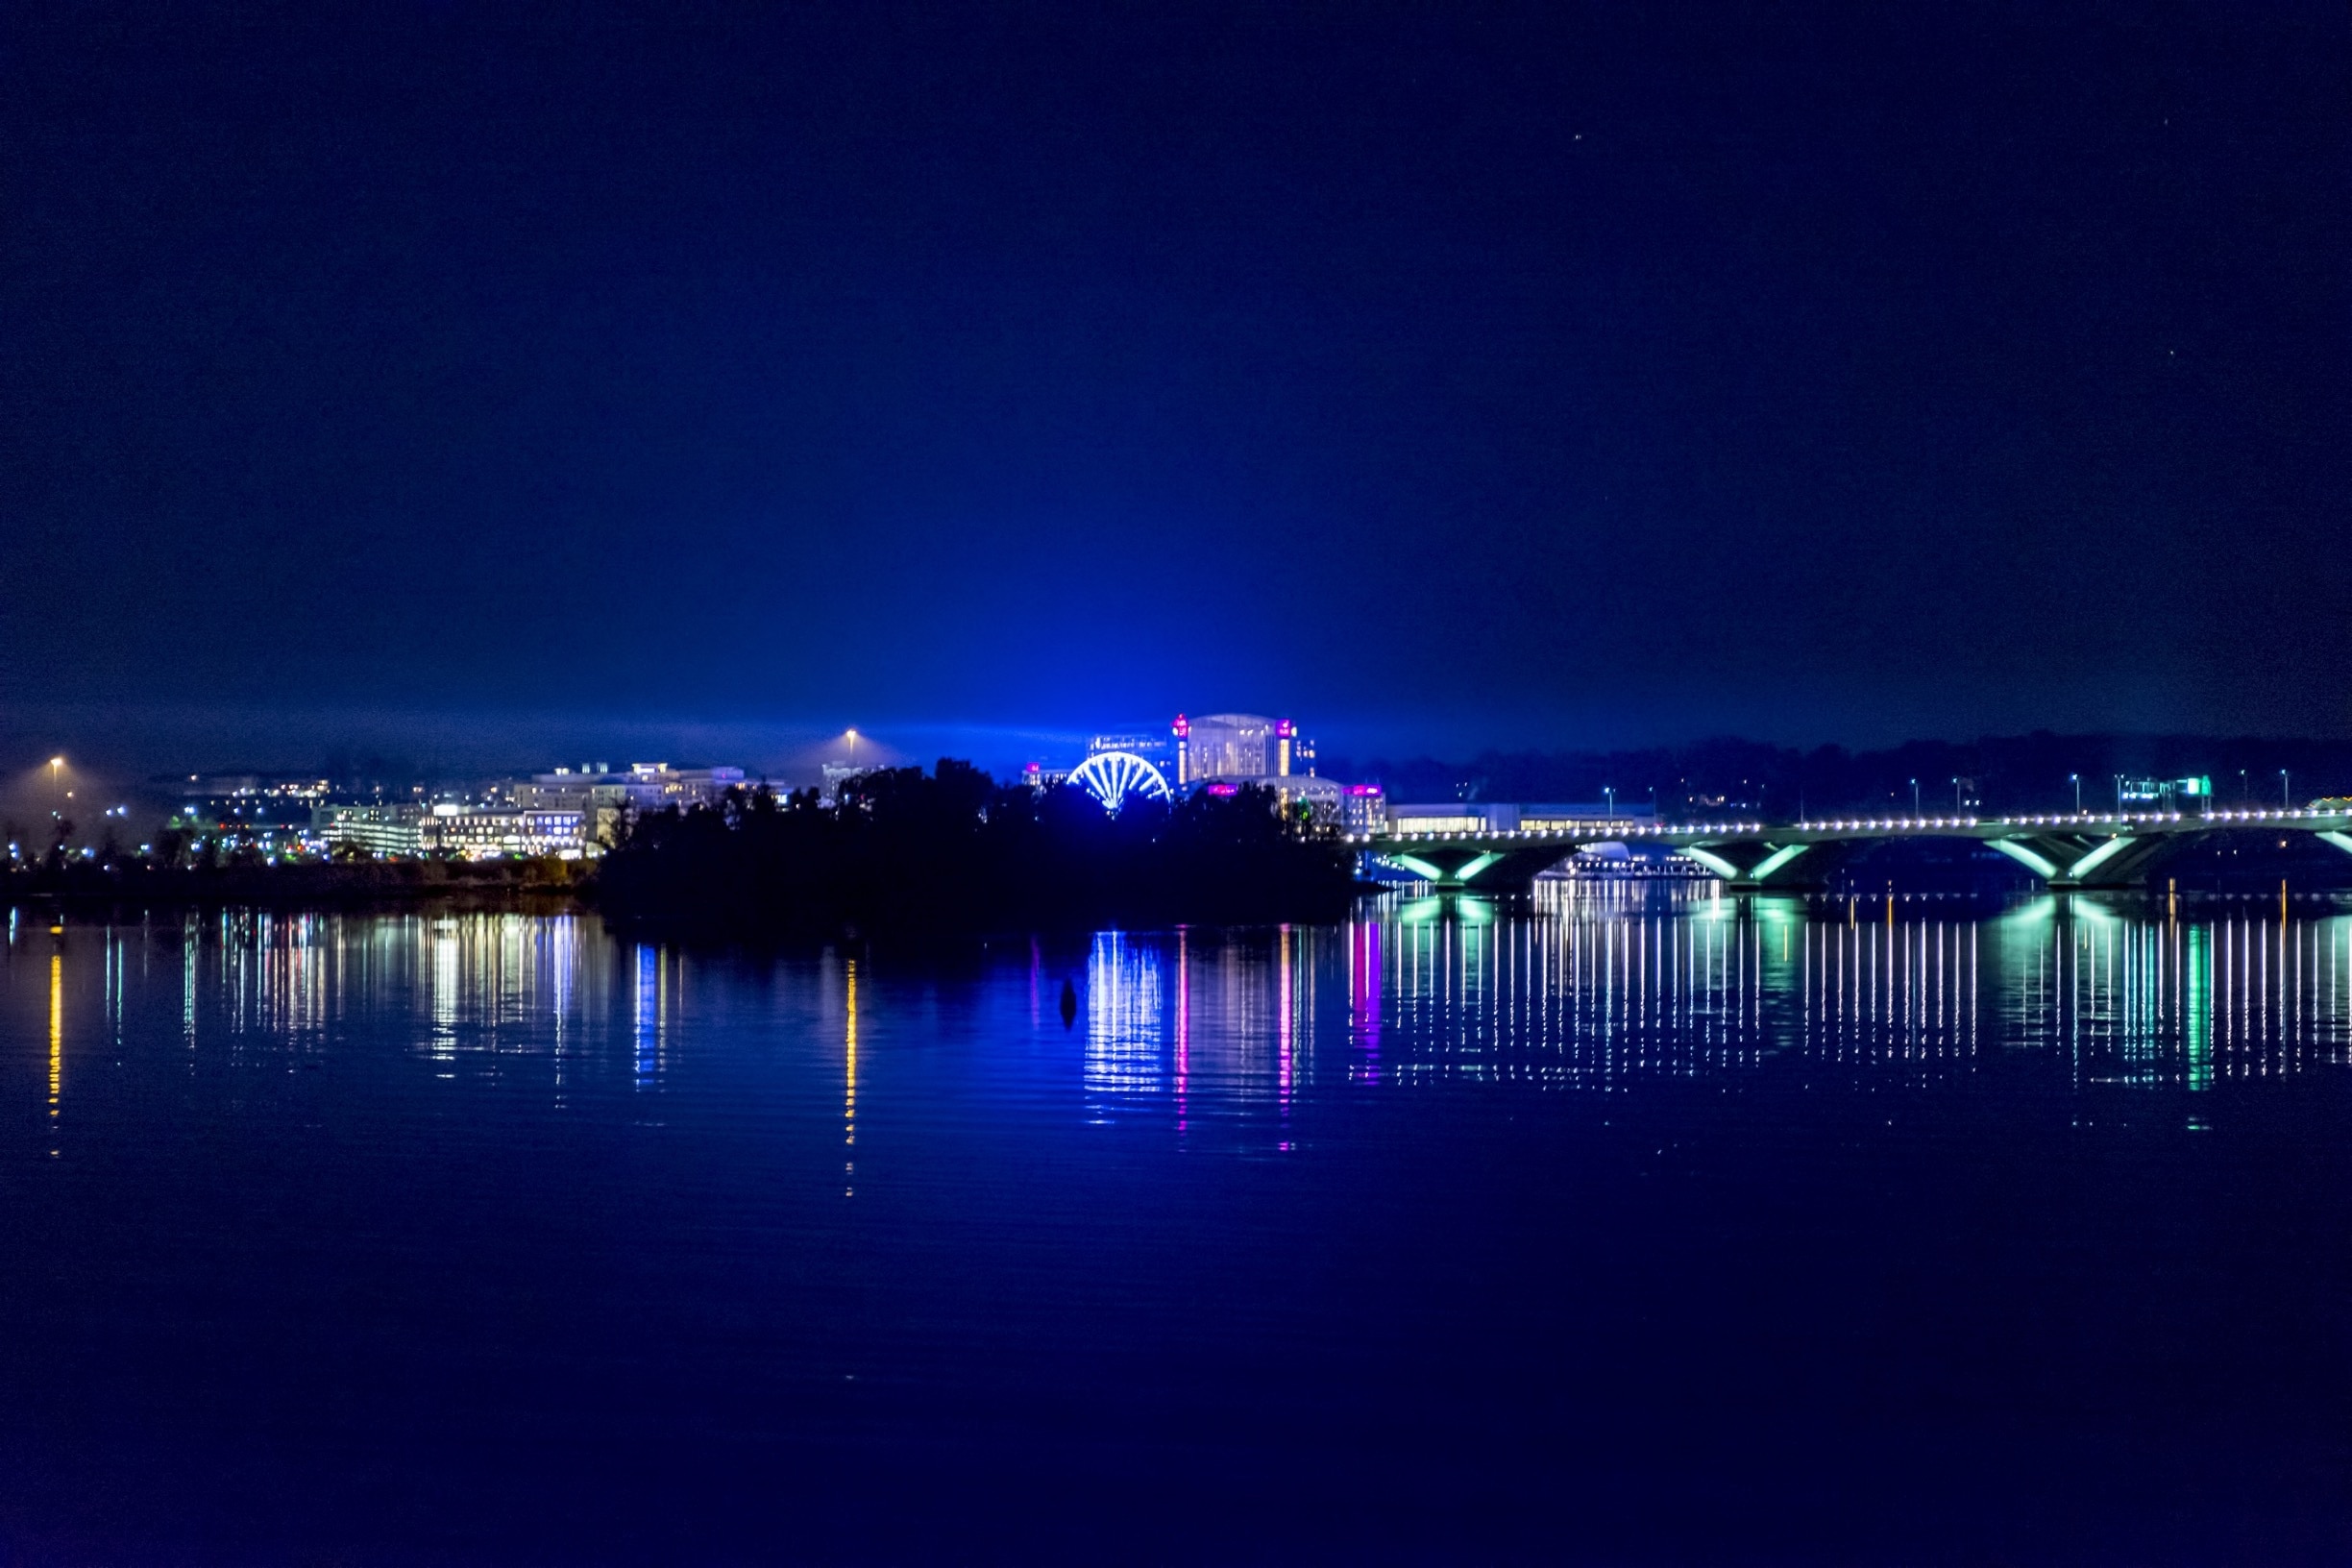 Another shot from the Potomac river.  Cool night shots
#URBANJUNGLE